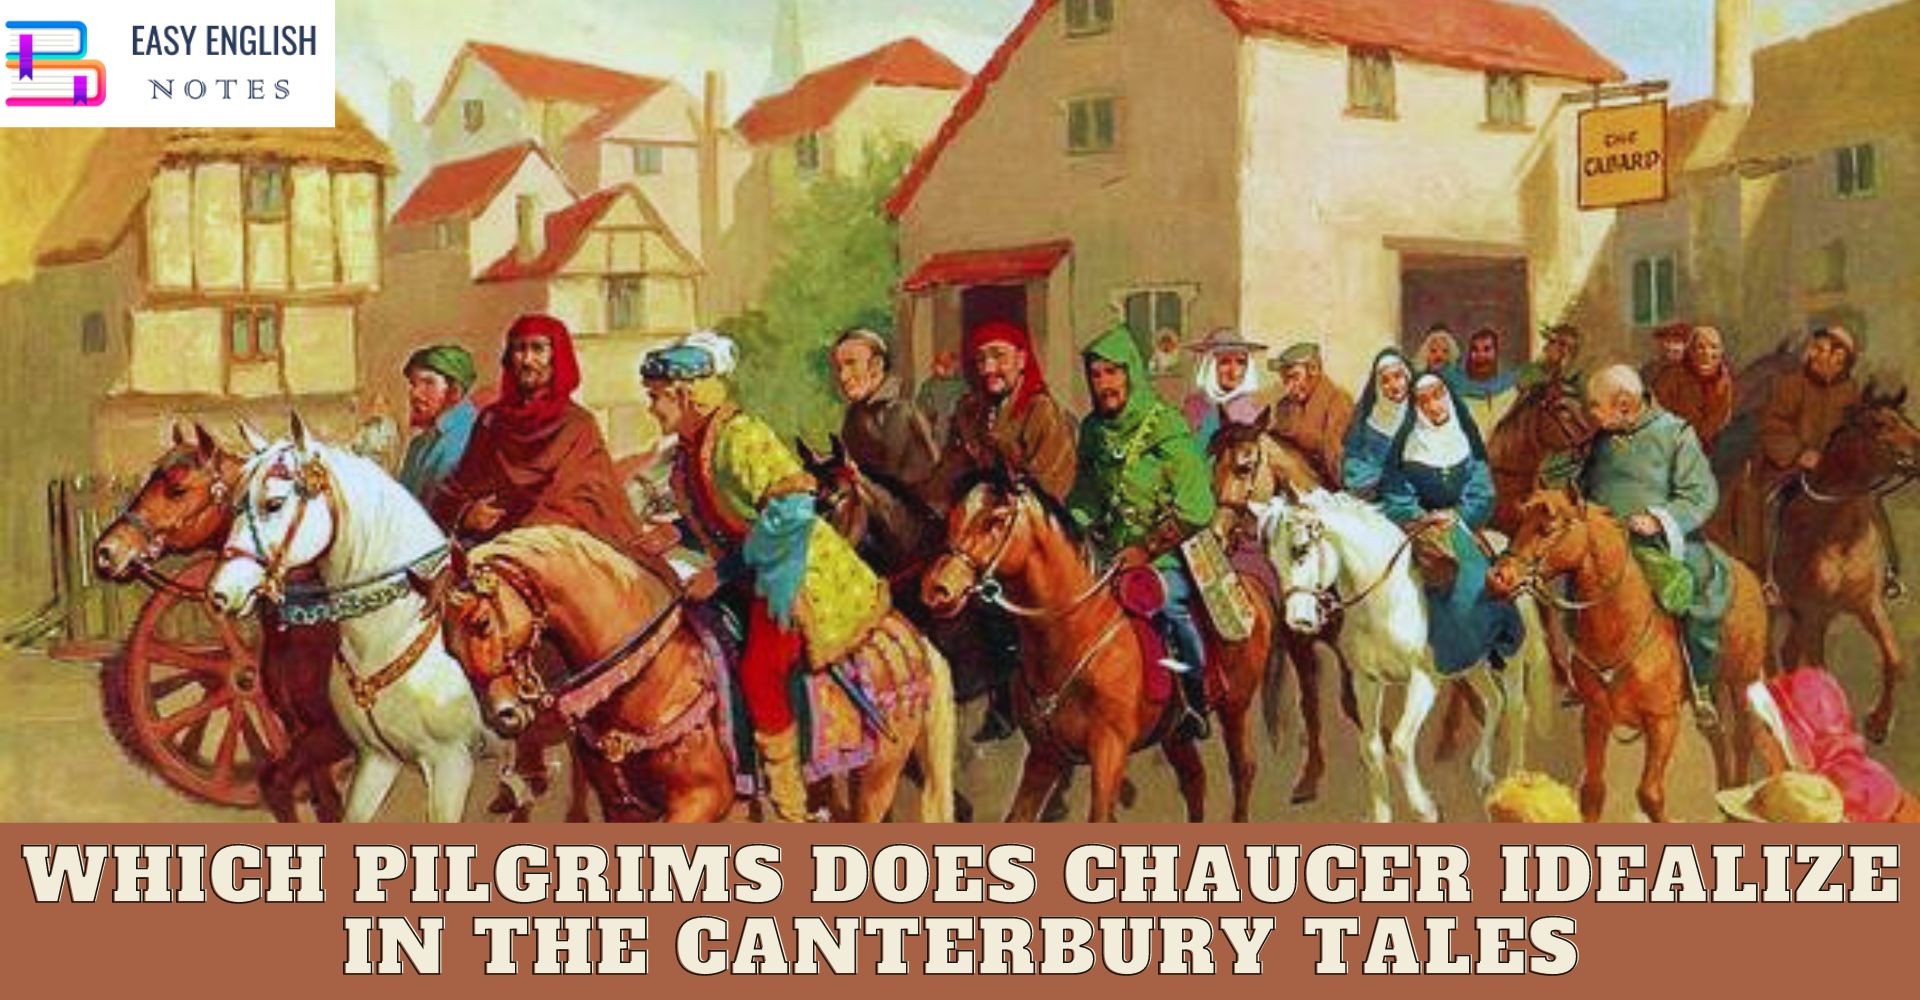 Which pilgrims does Chaucer idealize in The Canterbury Tales